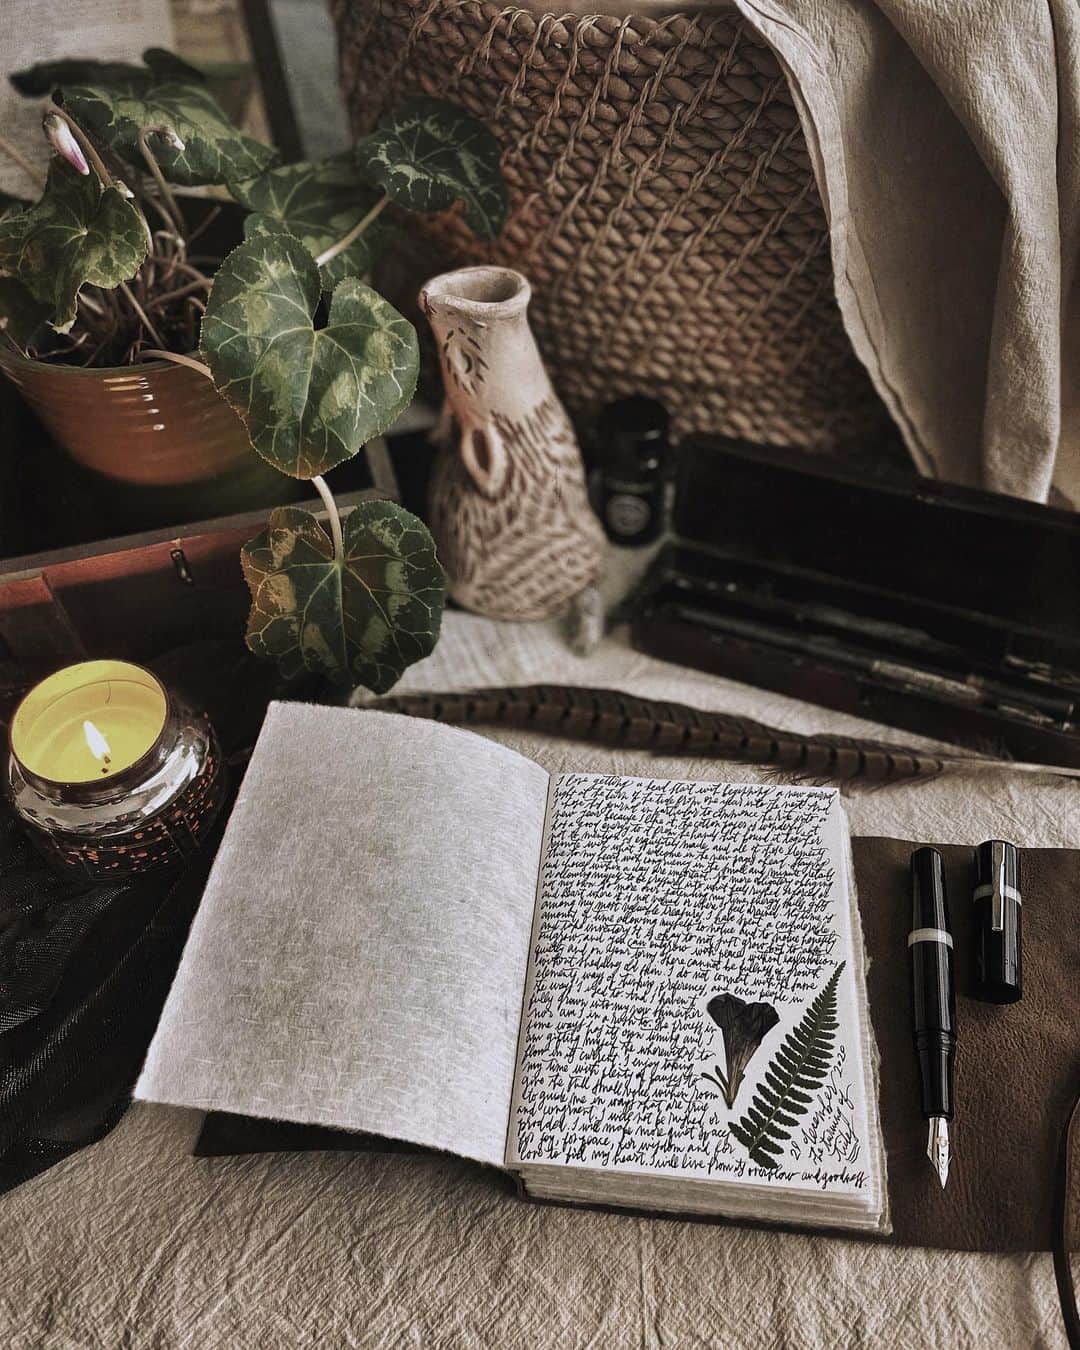 Catharine Mi-Sookさんのインスタグラム写真 - (Catharine Mi-SookInstagram)「Commencing a journal at the turn of the tide and the precipice from one year to the next. I prefer starting new pages and books right in the turning. There is a magic in that space. Hibernation mode is fully afoot and I am enjoying the extra quiet to attune to the still and small within the heart. Lots of noticing in the musings of late, much without judgment one way or another, more just taking note and adjusting the chords for a lovely harmony. In the noticing I’ve discovered how uncharted notions can turn things sideways and upside down. Things that I feel I should like, I’ve discovered I really don’t. Other areas where I feel like I should feel good in connection to whatever it is, I find myself feeling drained. In the growing, there is a quiet outgrowing. Sometimes I hardly notice it until one day things just don’t fit anymore and are quite uncomfortable. In this particular turn of seasons, I’ve let be with it and dare I say enjoy it. It’s a fruitful process and one that’s been nourishing and filling. I don’t have all my ducks lined up for the new year and I’m taking things slow. No more rushed pressure or prodding, but rather mindful strides with pauses and noticing, attuning and adjusting, with much gratitude in the laying down and opening anew. . . . . Model 19 Fountain Pen & Black Cherry Ink @franklinchristoph. Leather Handmade Journal w/ cotton paper @quillandarrow. Ceramic Wolf Incense Burner #mypitchpine @pitchpinepottery. Luna Alpha Ring @foxand.thefawn. . . . . #journaling #journalinspiration #memoirs #franklinchristoph #fountainpens #penmanship #quillandarrow #bookbinding #handmadejournal #pitchpinepottery #booksandcandles #foxandthefawn #metalsmithing #creativespace #darkacademiaaesthetic #darkandmoody #candlelovers #anthropologiehome #capturequiet #beautyofstillmoments #cozycorner #daysofsmallthings #livemoremagic #lightacademiaaesthetic #abmathome」12月30日 4時20分 - catharinemisook